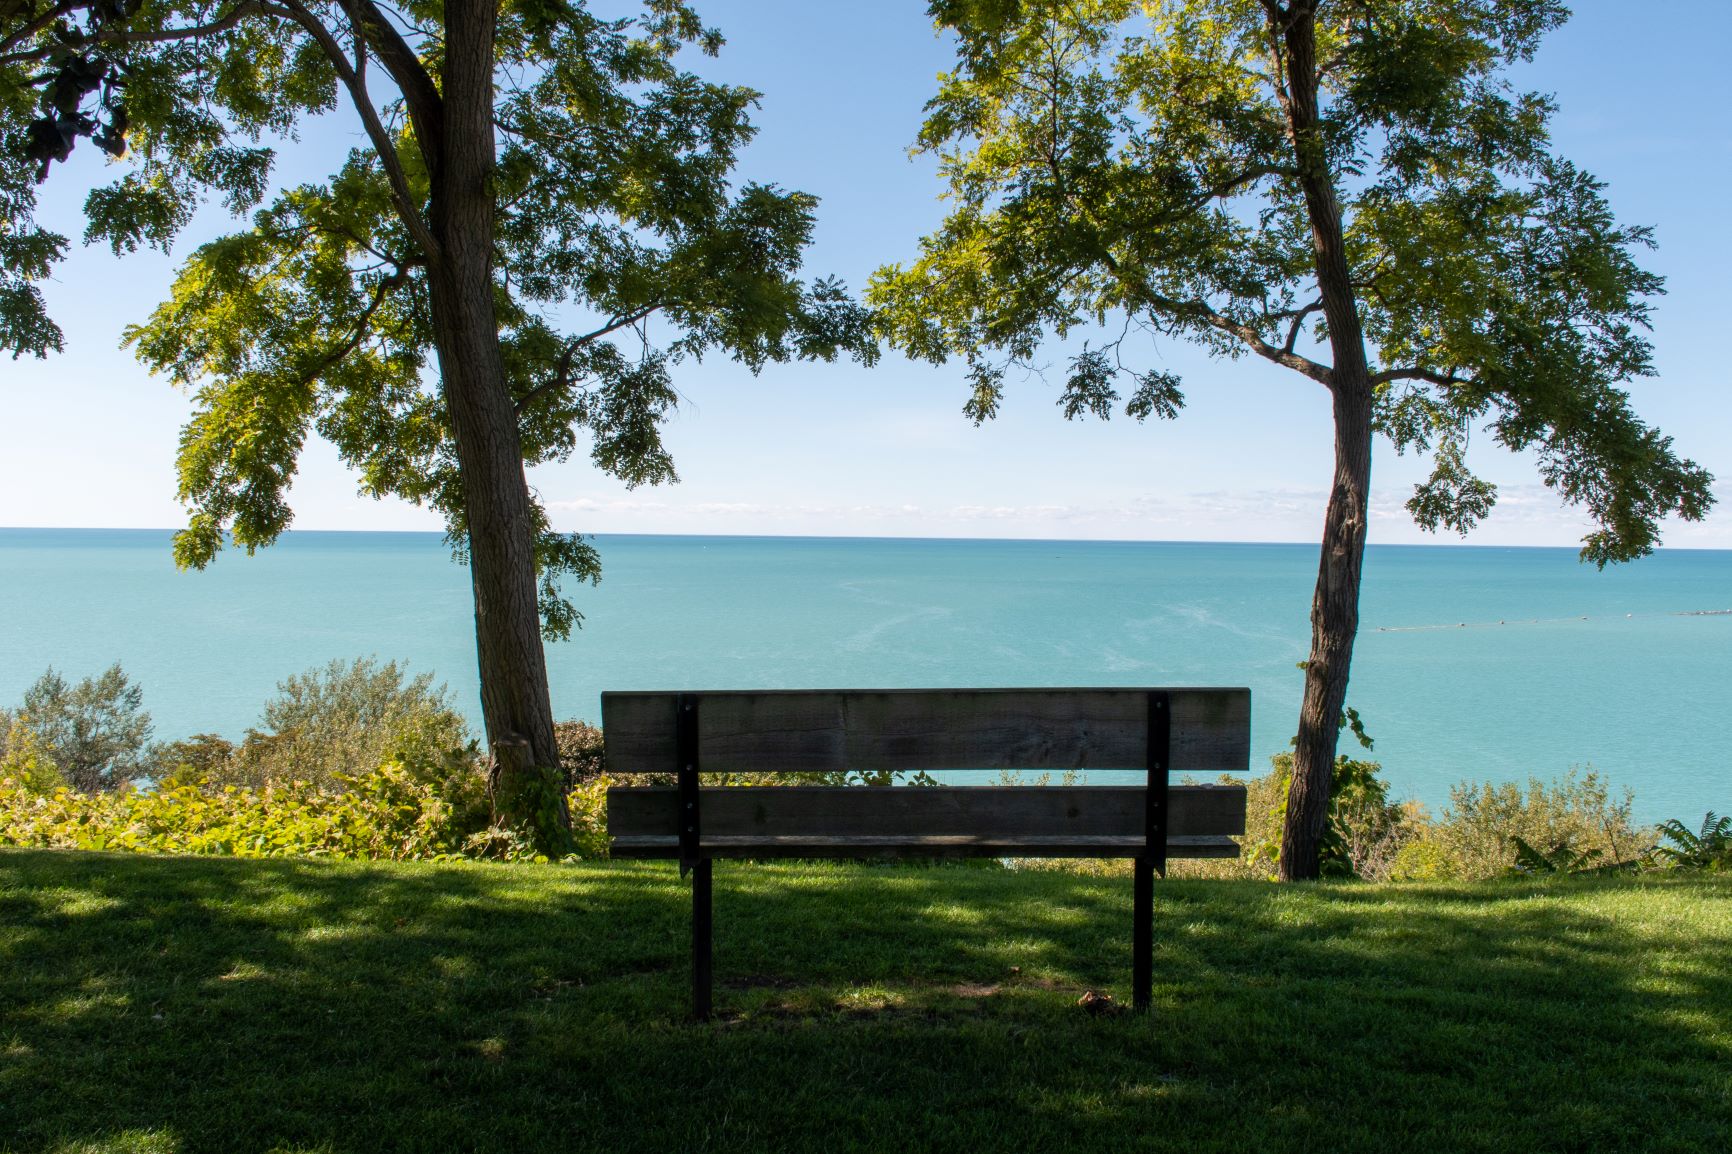 The small town of Goderich Ontario offers visitors a great mix of history, a vibrant downtown and sandy beaches on Lake Huron. Perfect spot for a weekend getaway with lots of things to do in Goderich Ontario.